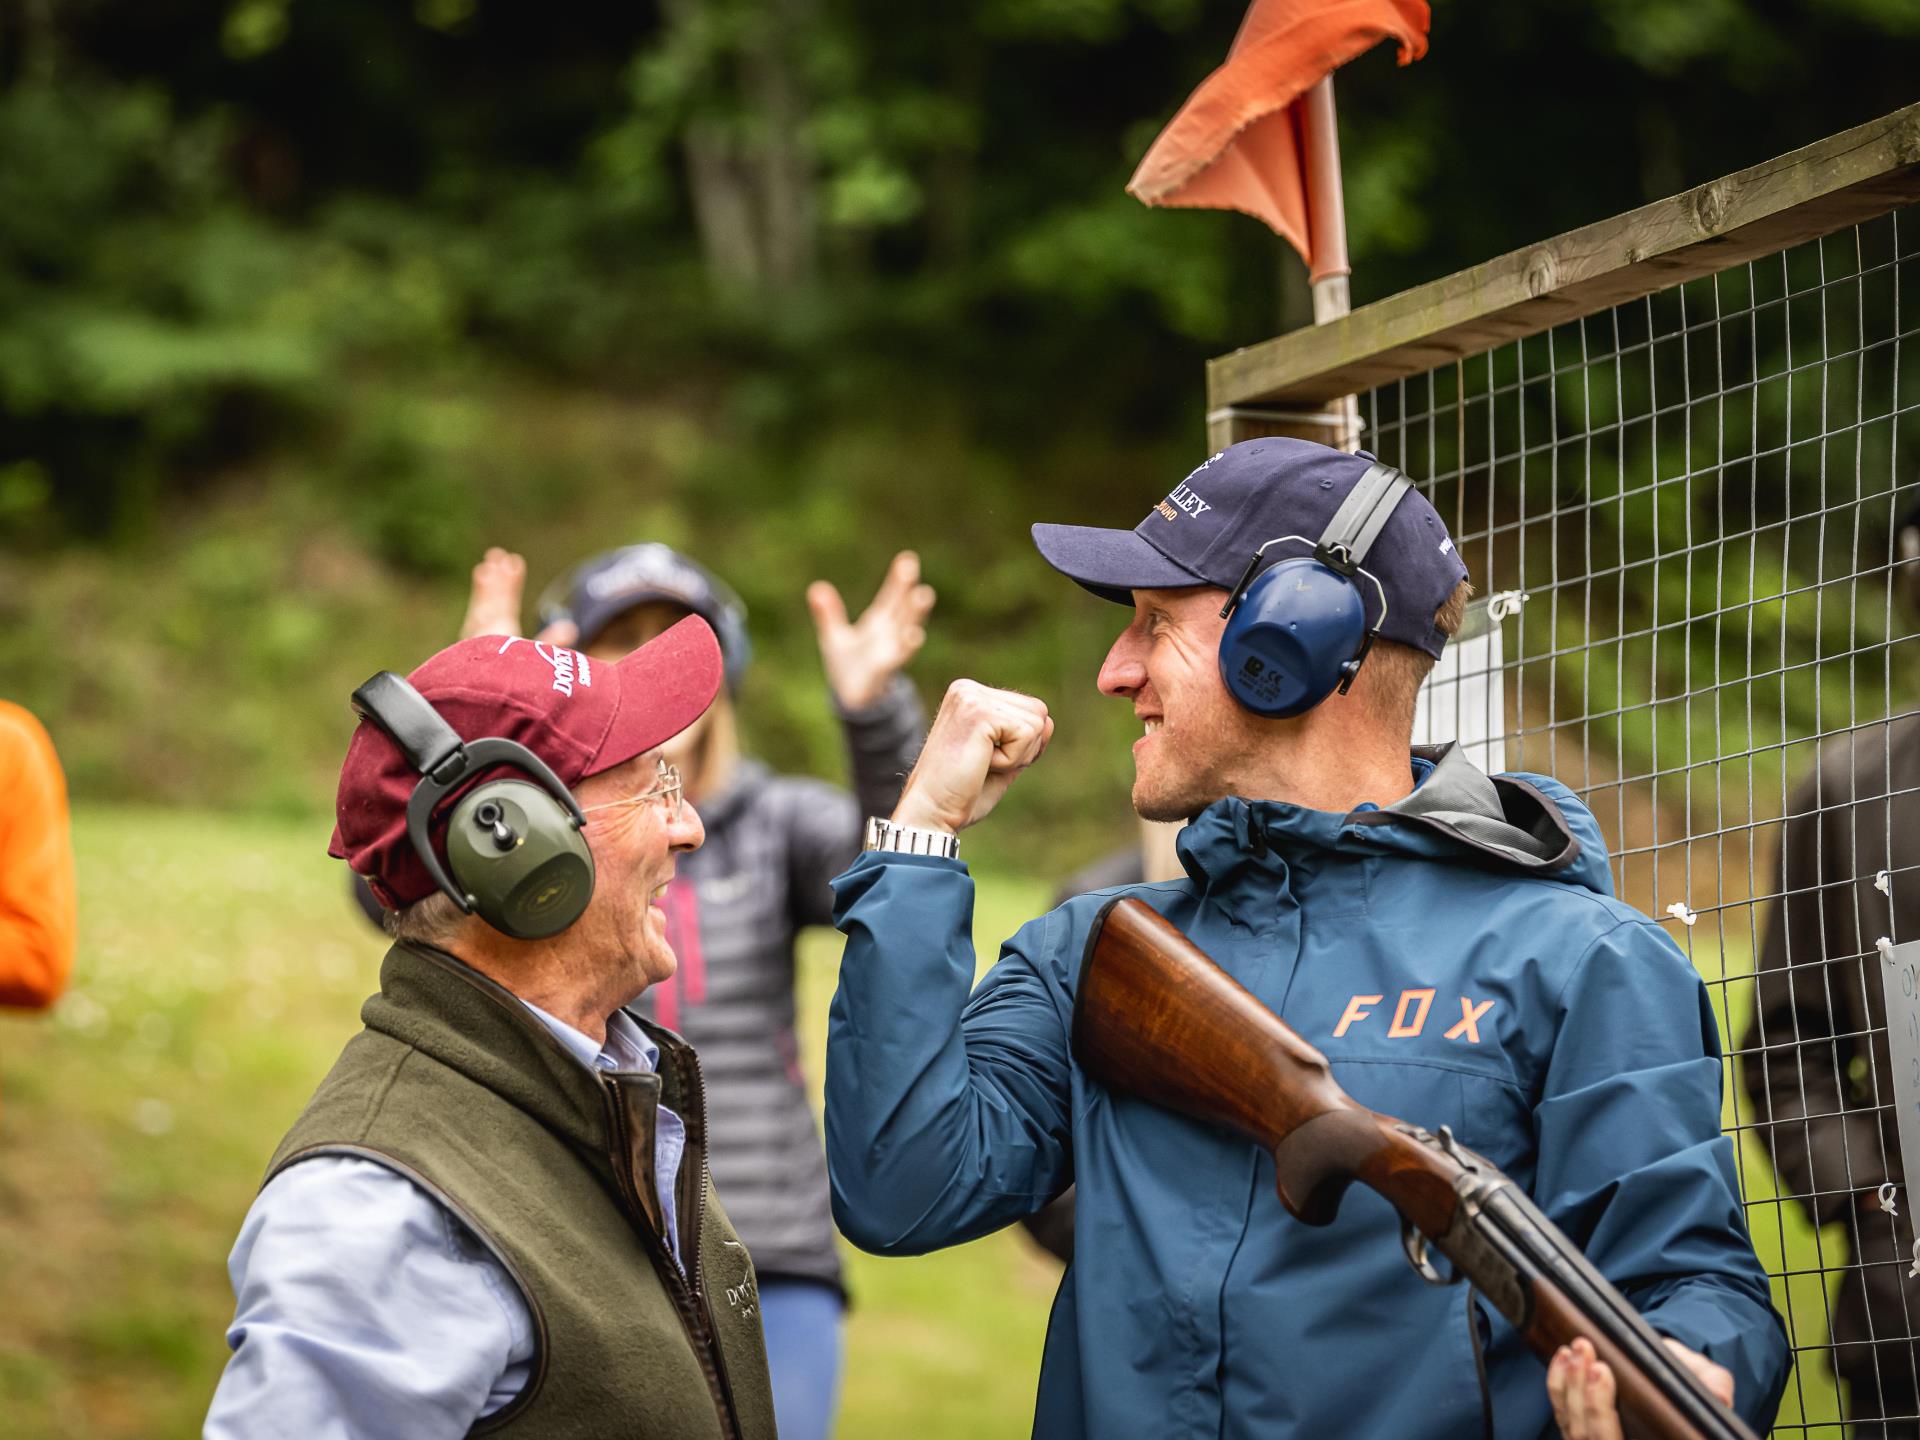 Beginner session - Clay Pigeon Shooting